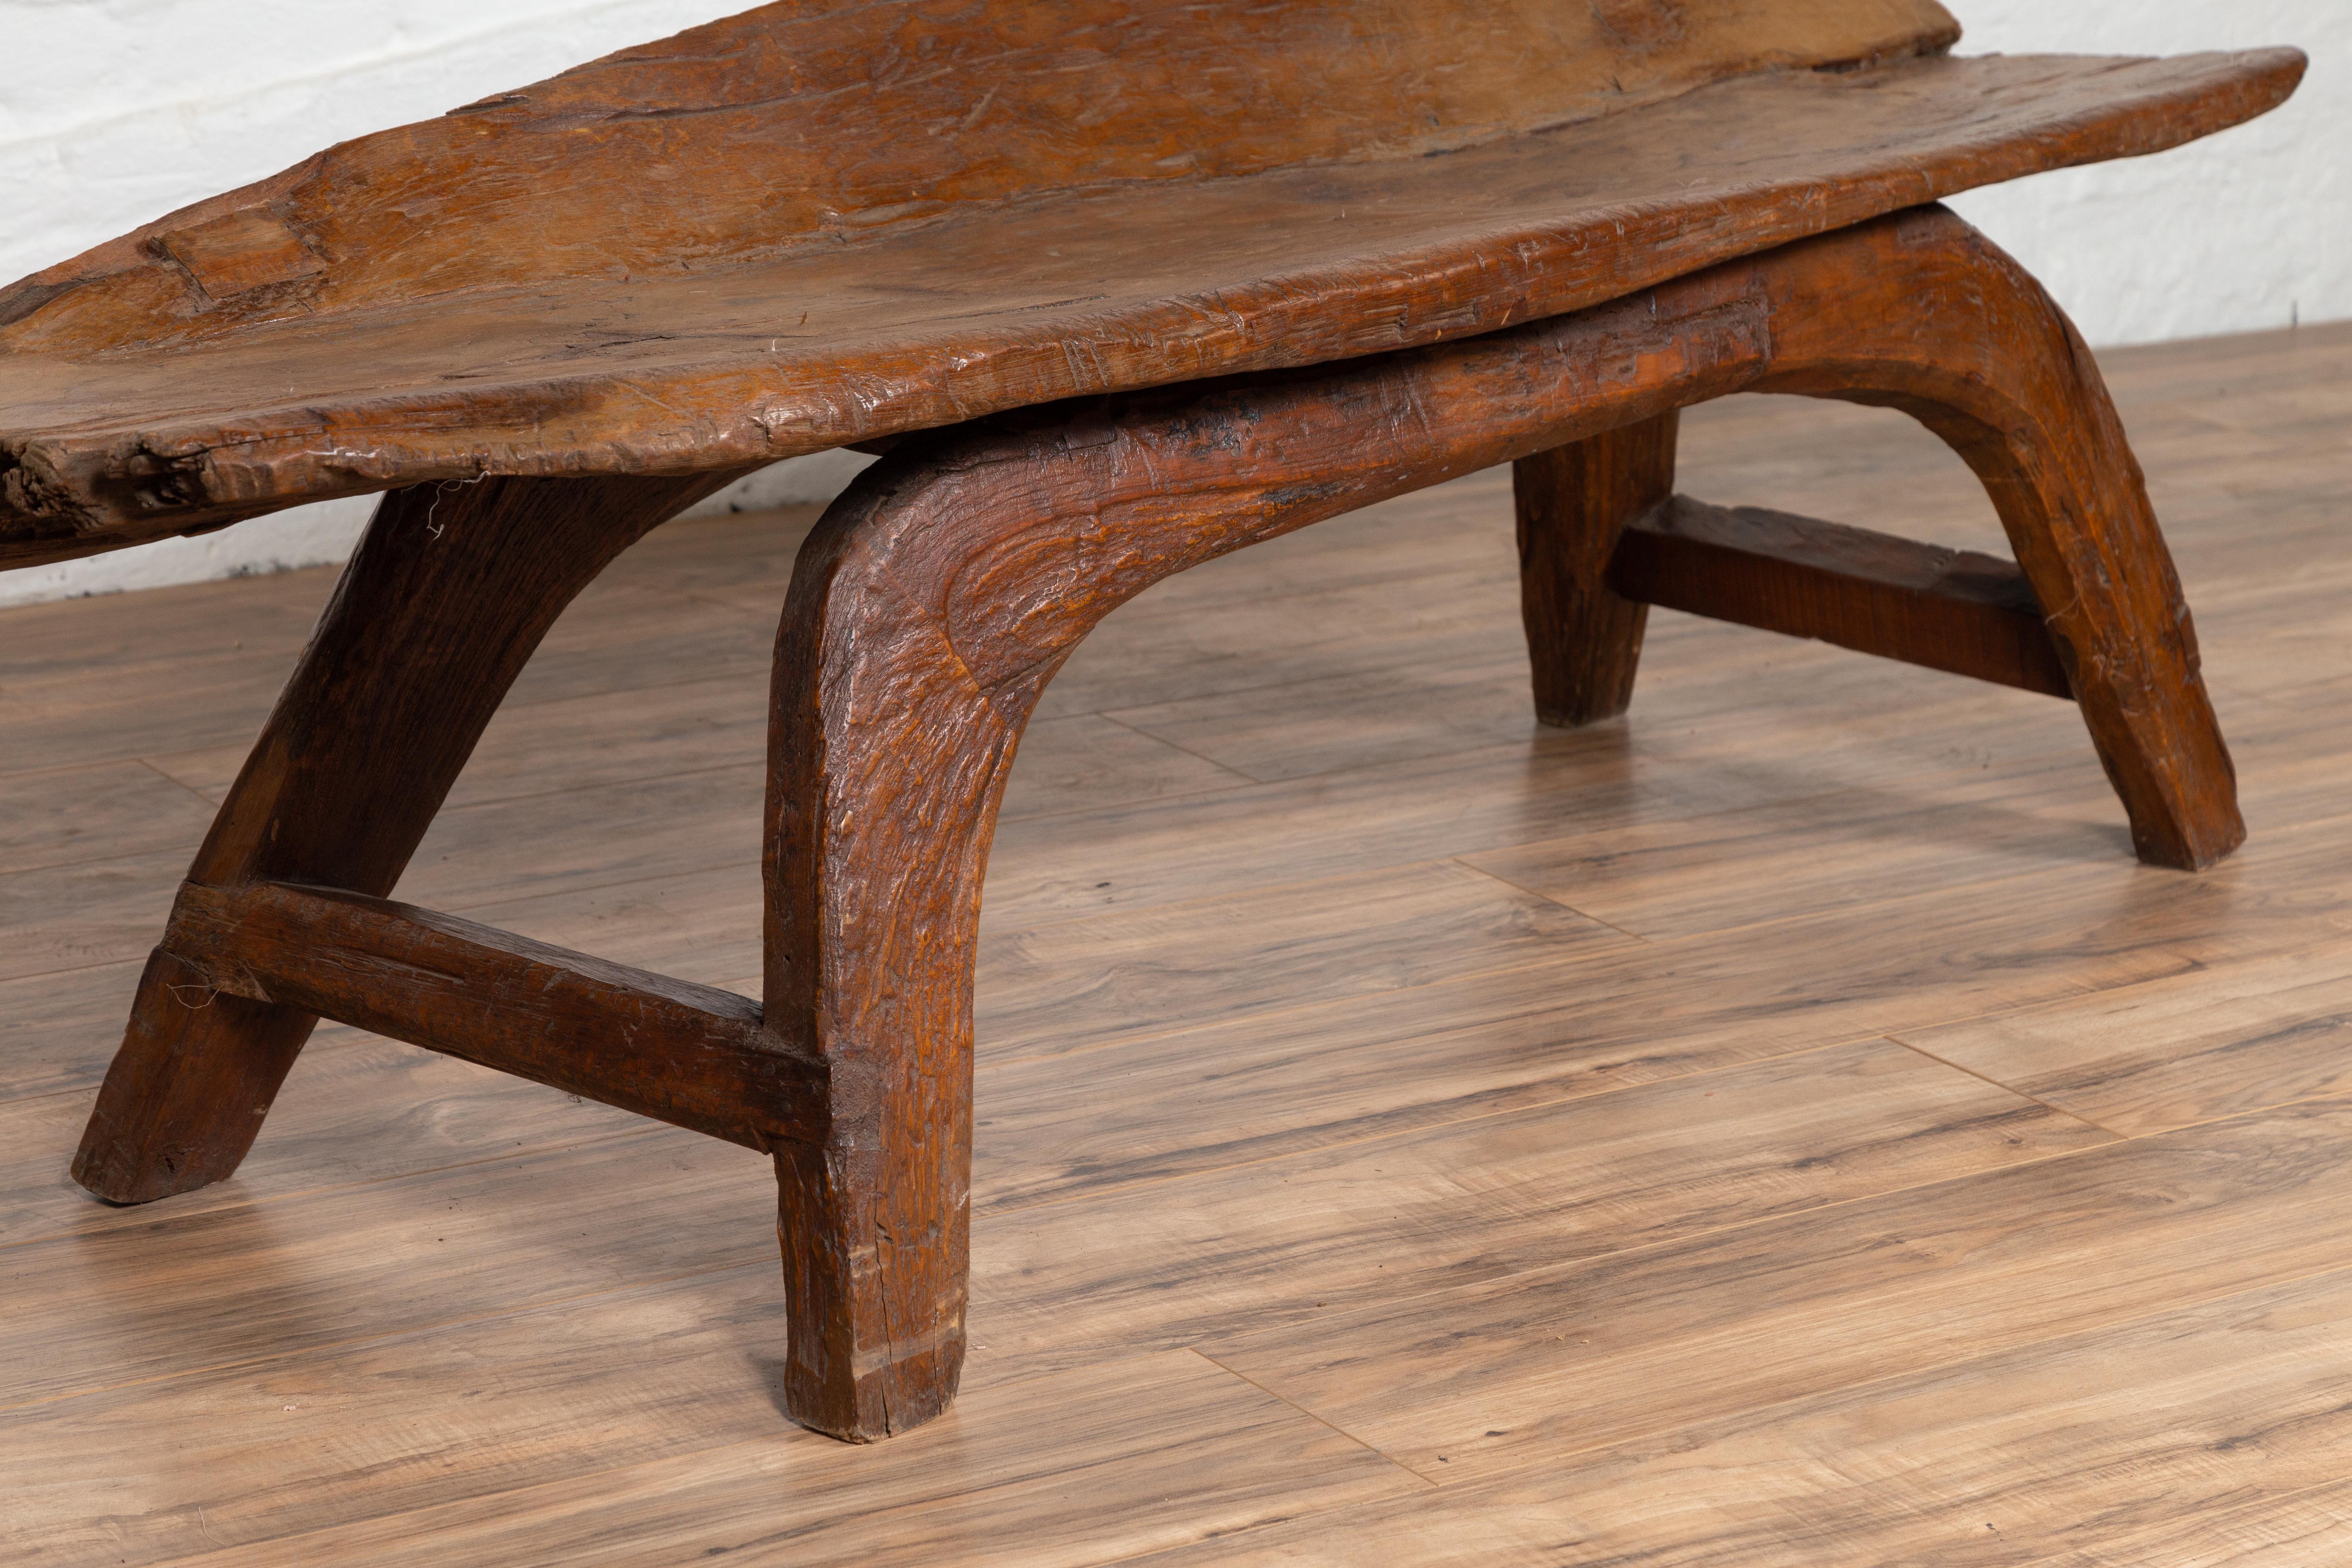 Freeform Design Antique Wooden Bench from the Riverbed of Bali with Arching Base 4